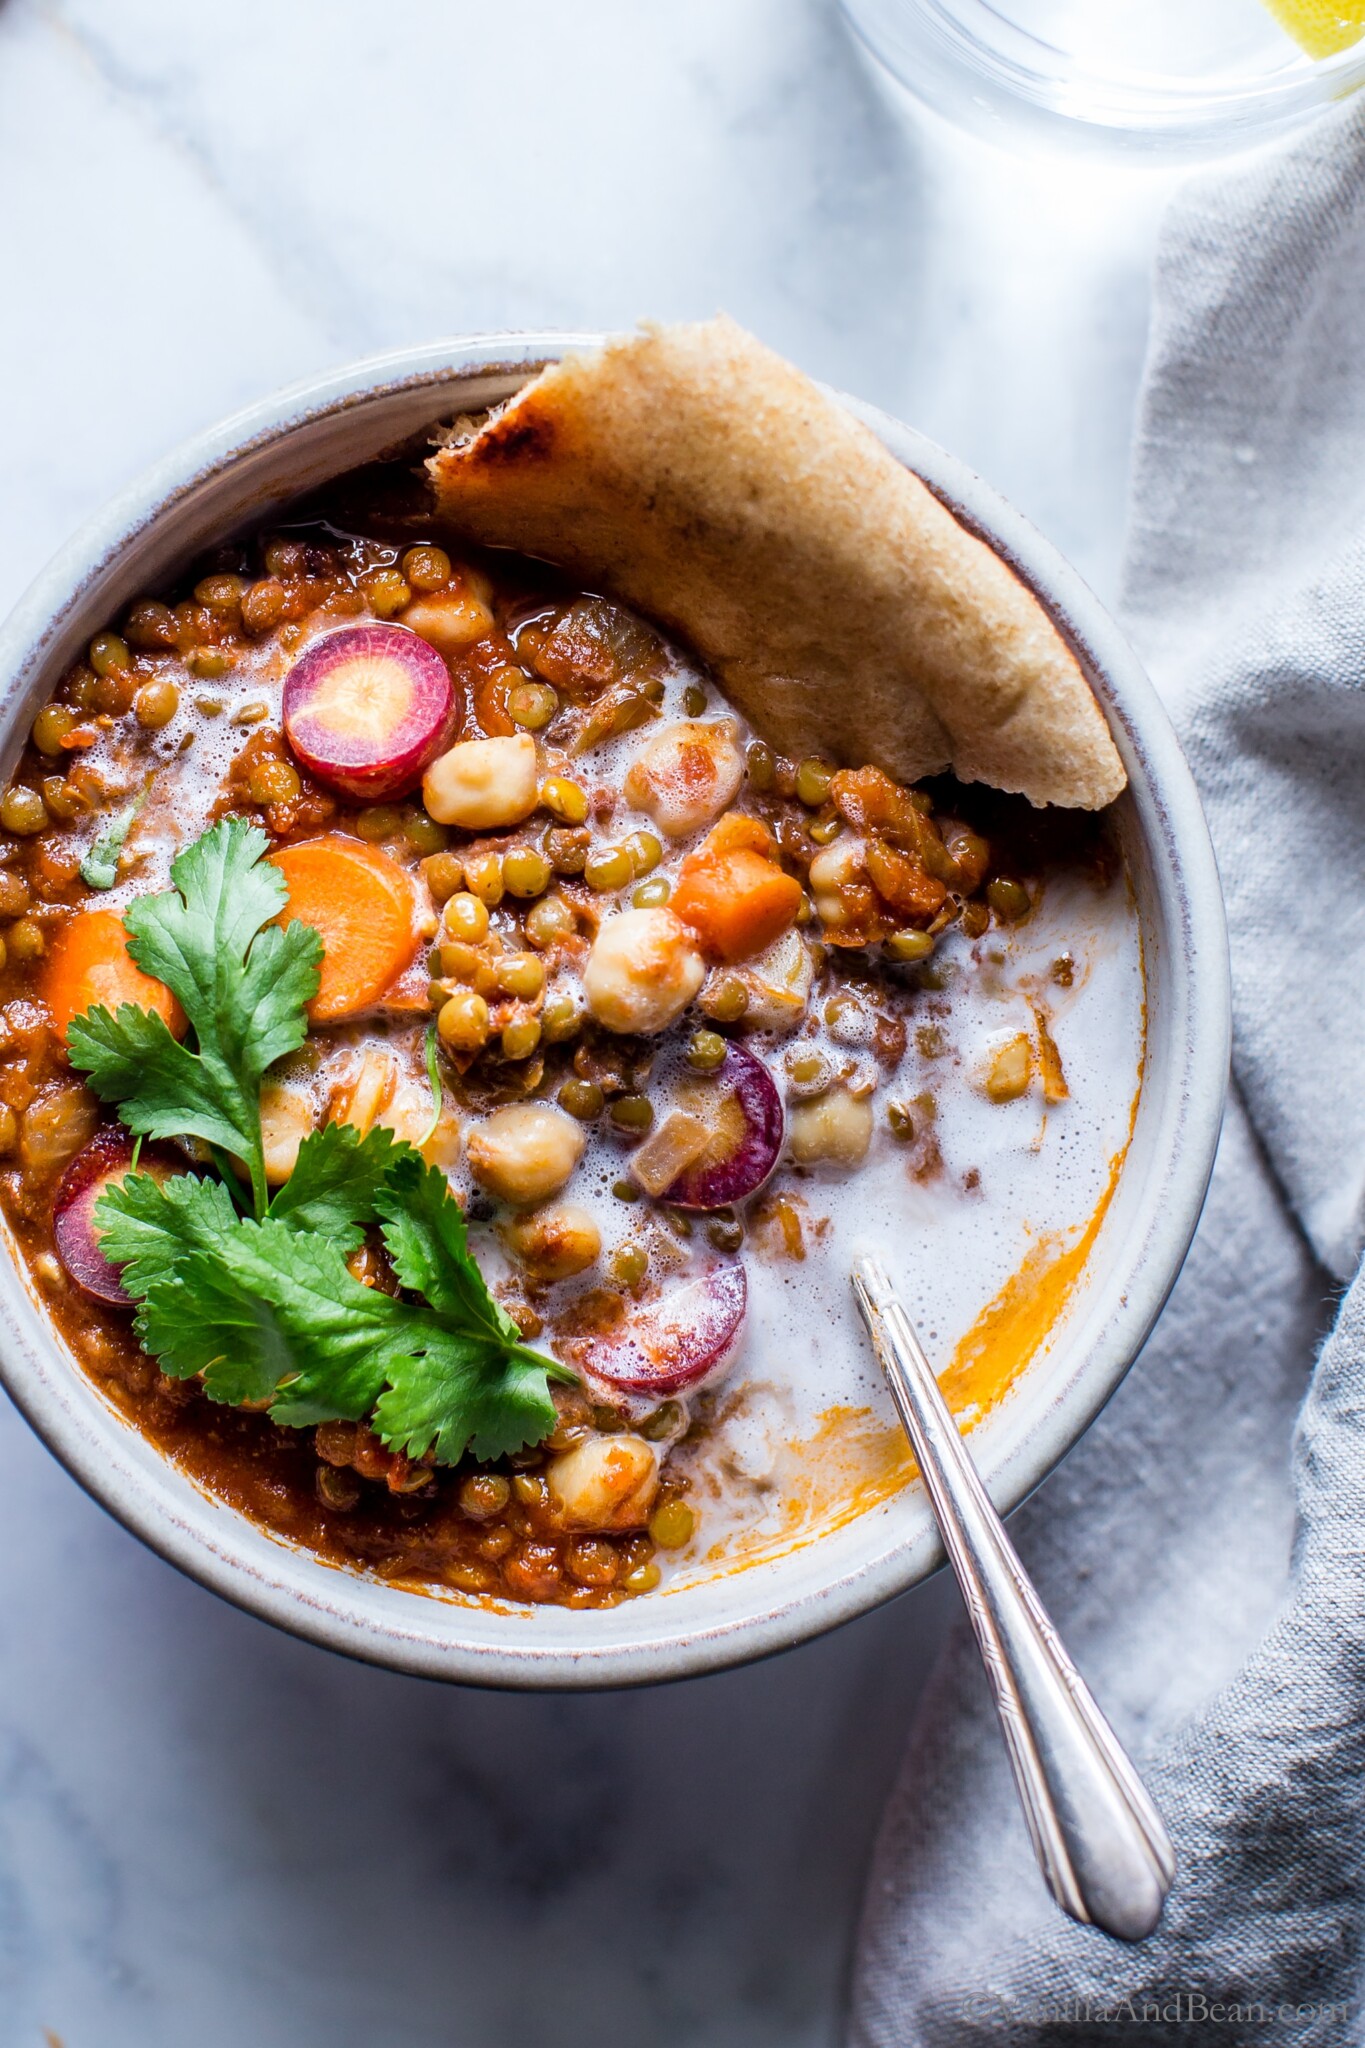 A bowl of moroccan lentil stew garnished with cilantro and pita bread.